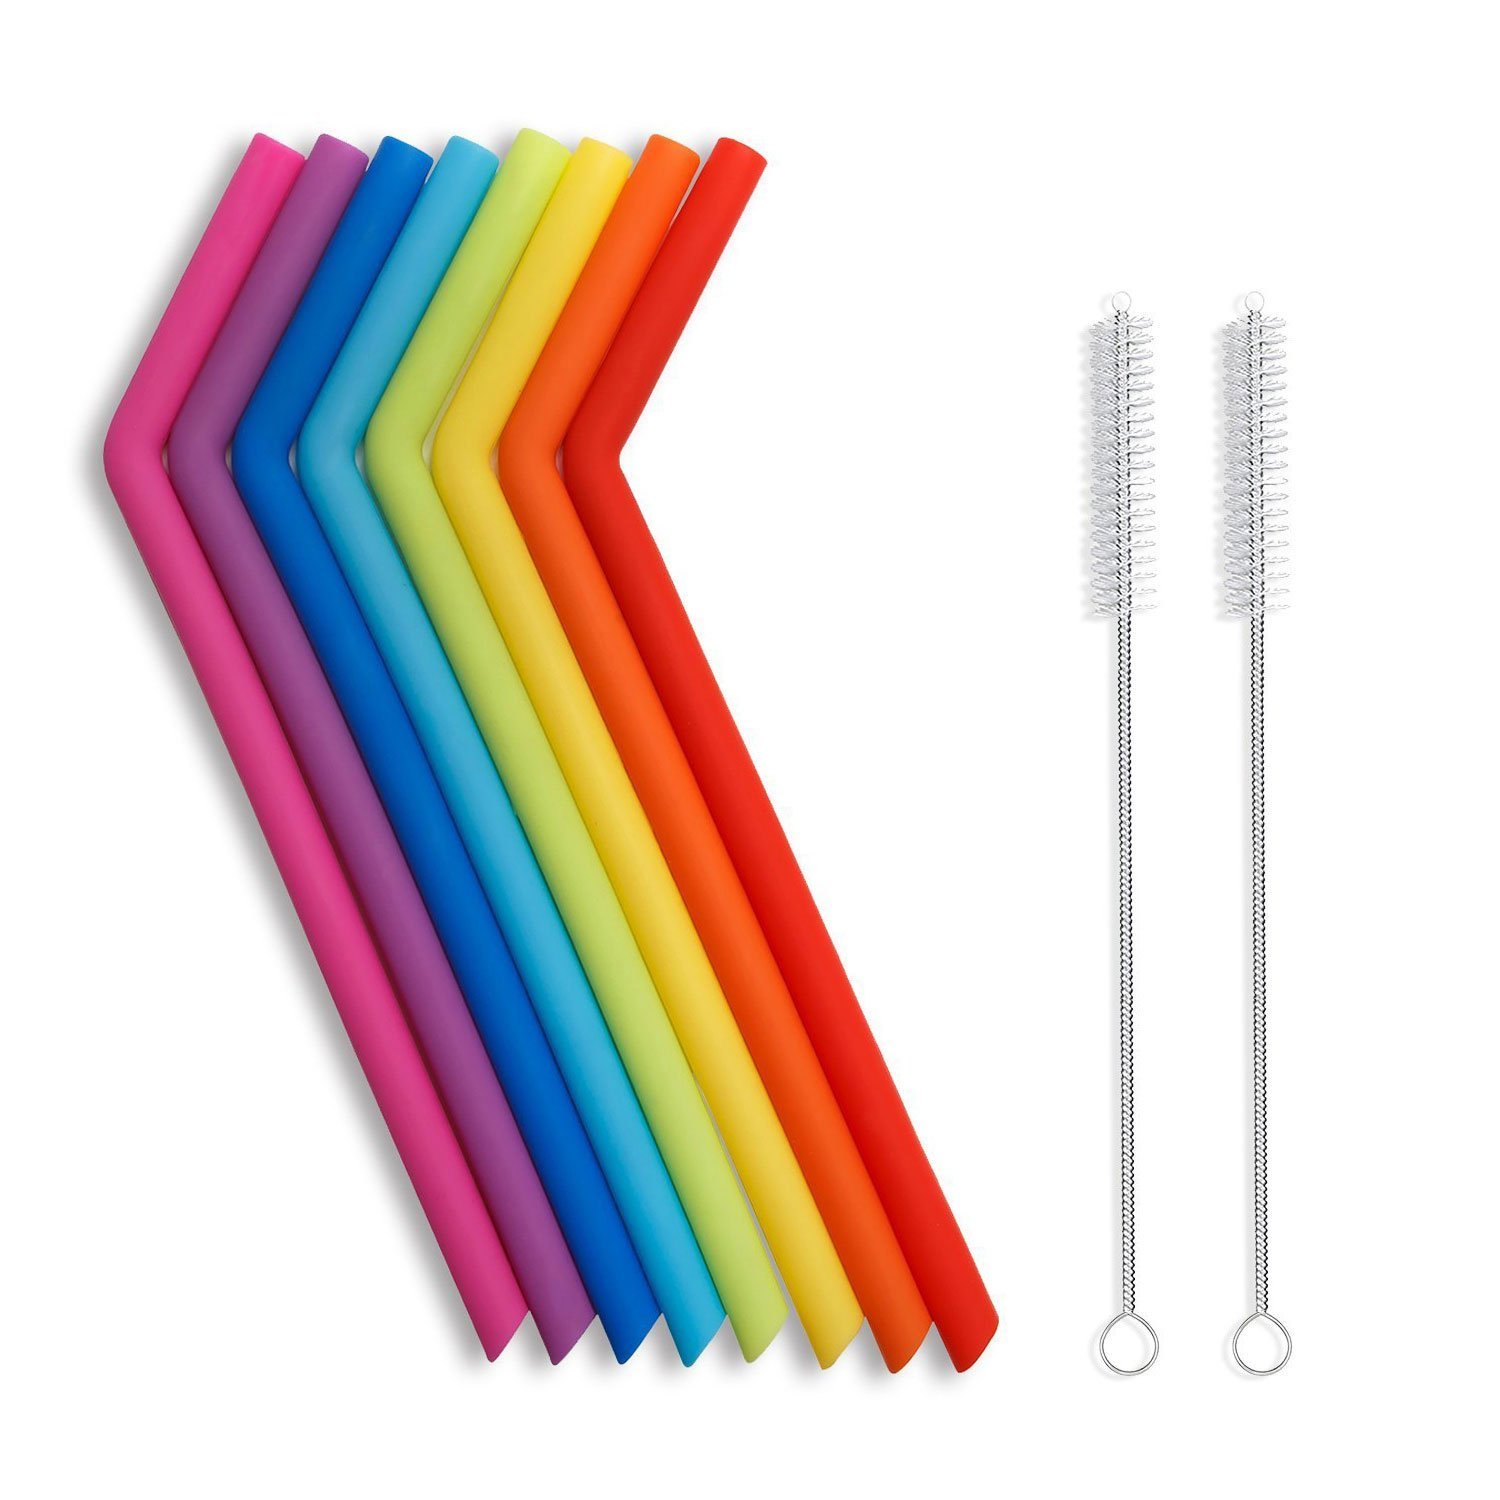 Amazon Hot sale 2018 BPA Free Reusable Drinking Straw FDA Silicone Straws 6 Packs with 2 Brushes Silicone Drinking Straw